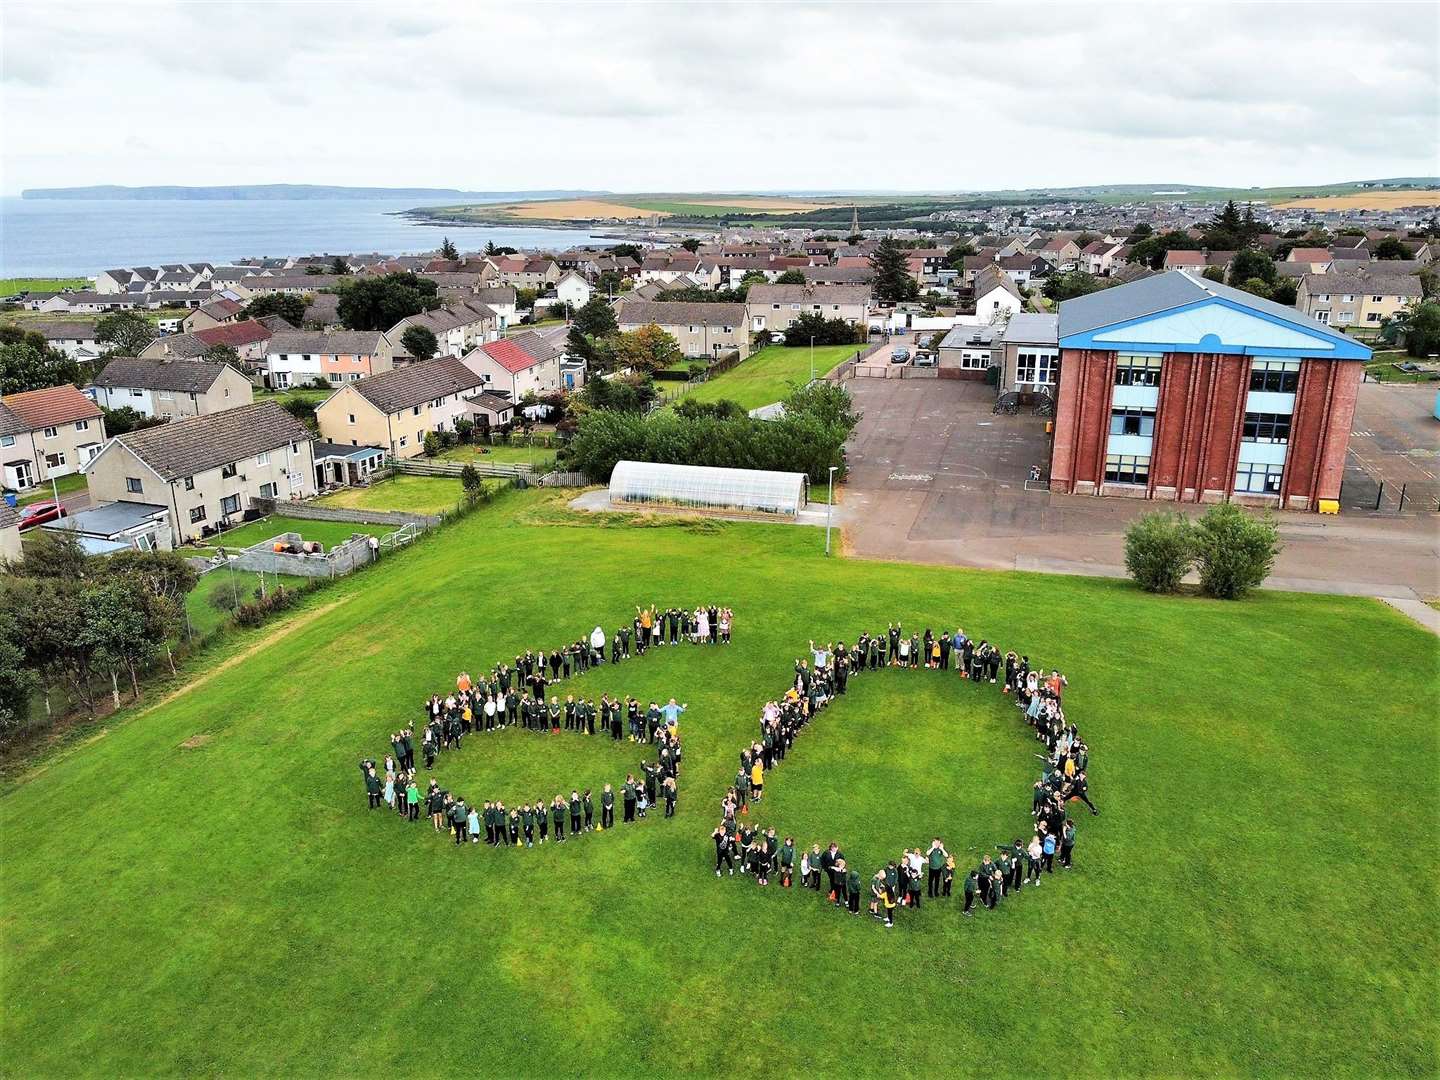 Jill Innes took this picture with her drone. It features the whole Pennyland school shaped into the number 60 to celebrate the diamond anniversary.